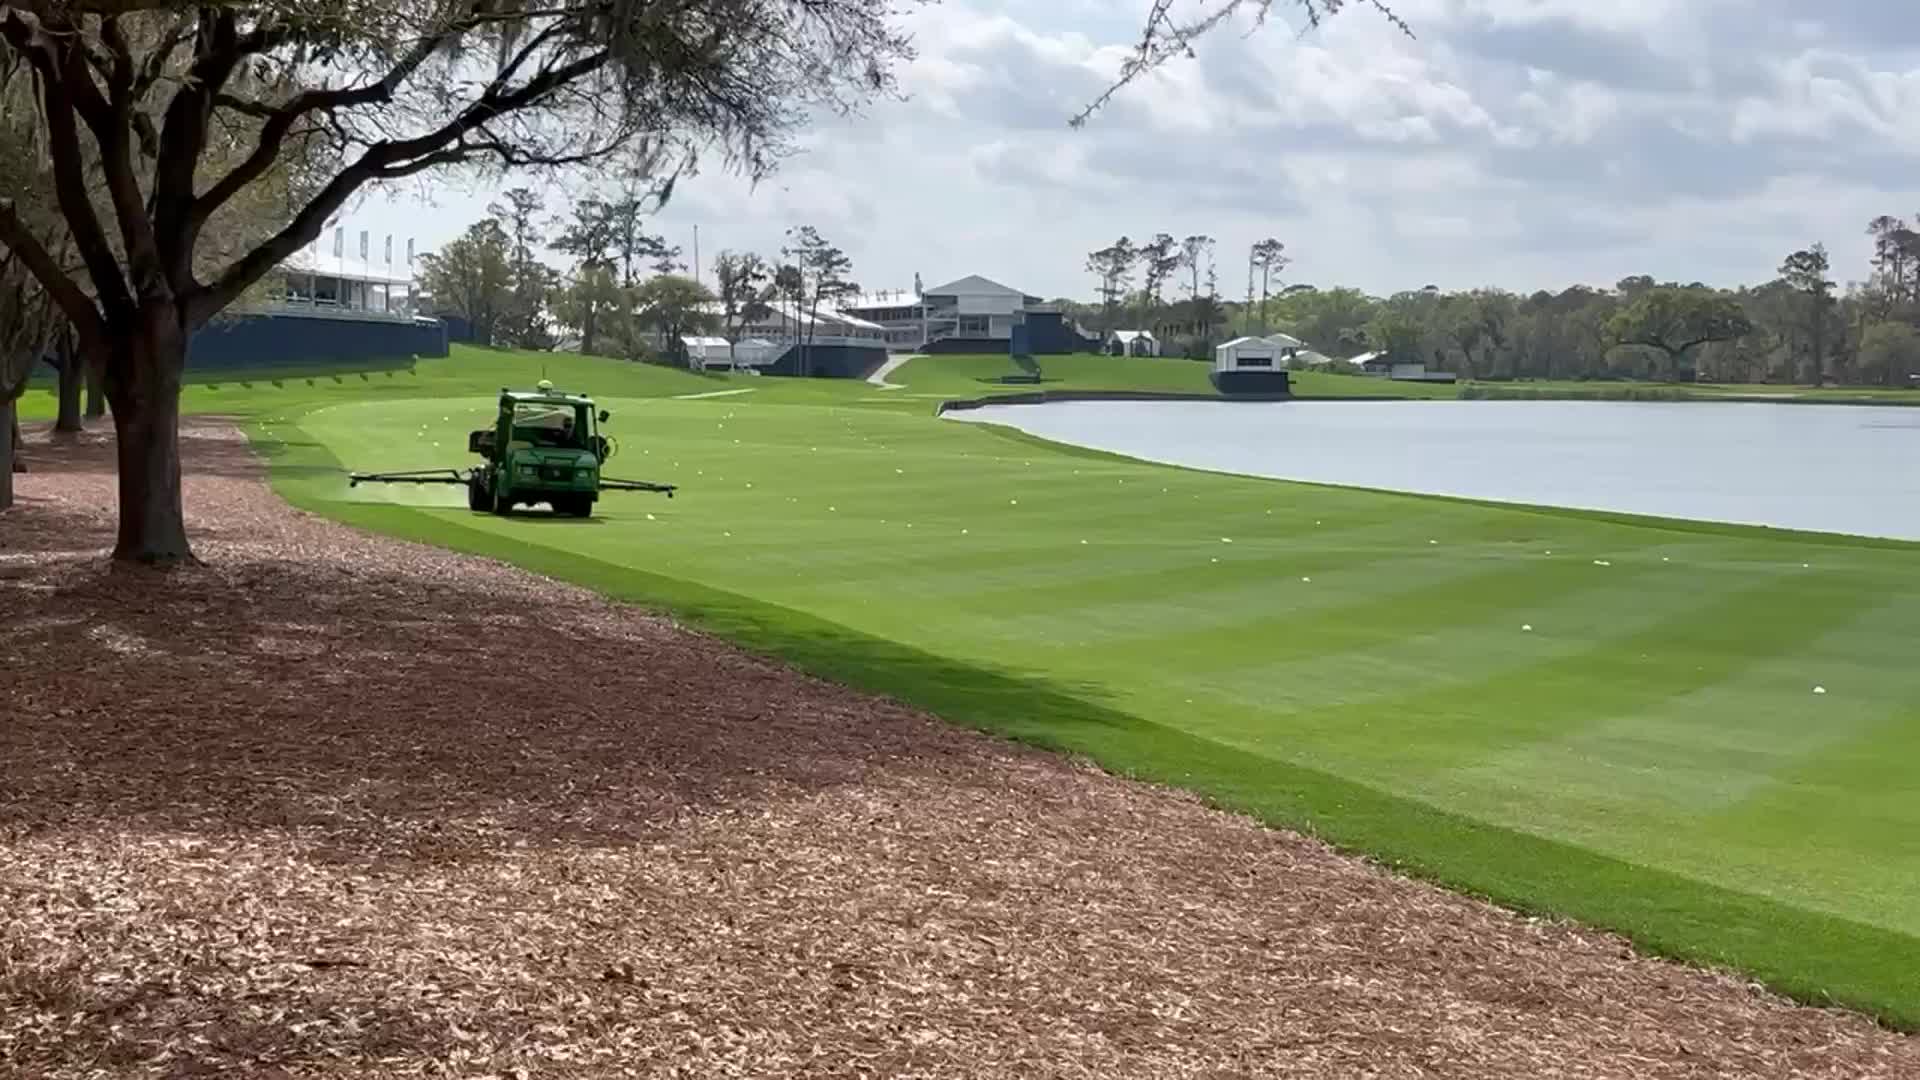 Getting the Stadium Course ready